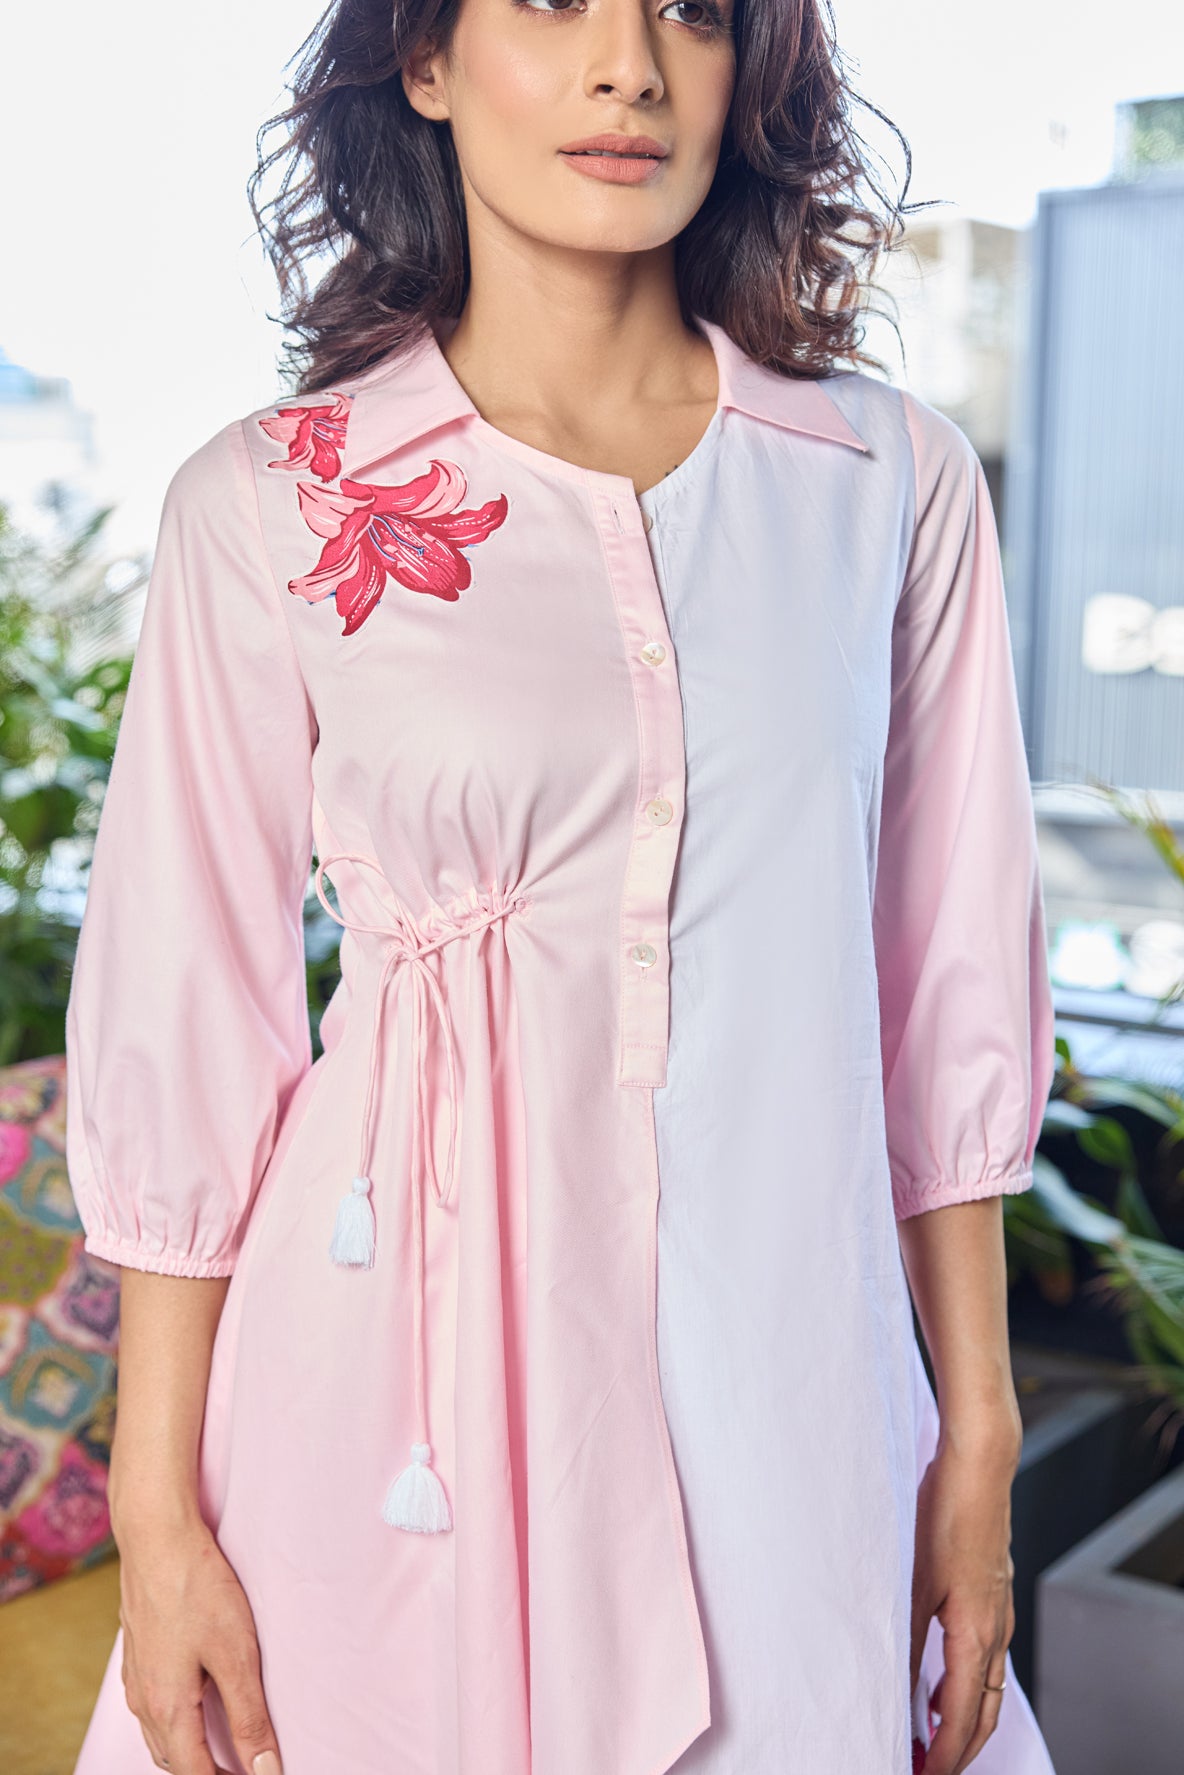 pink and white assymmetric shirt with tie-up